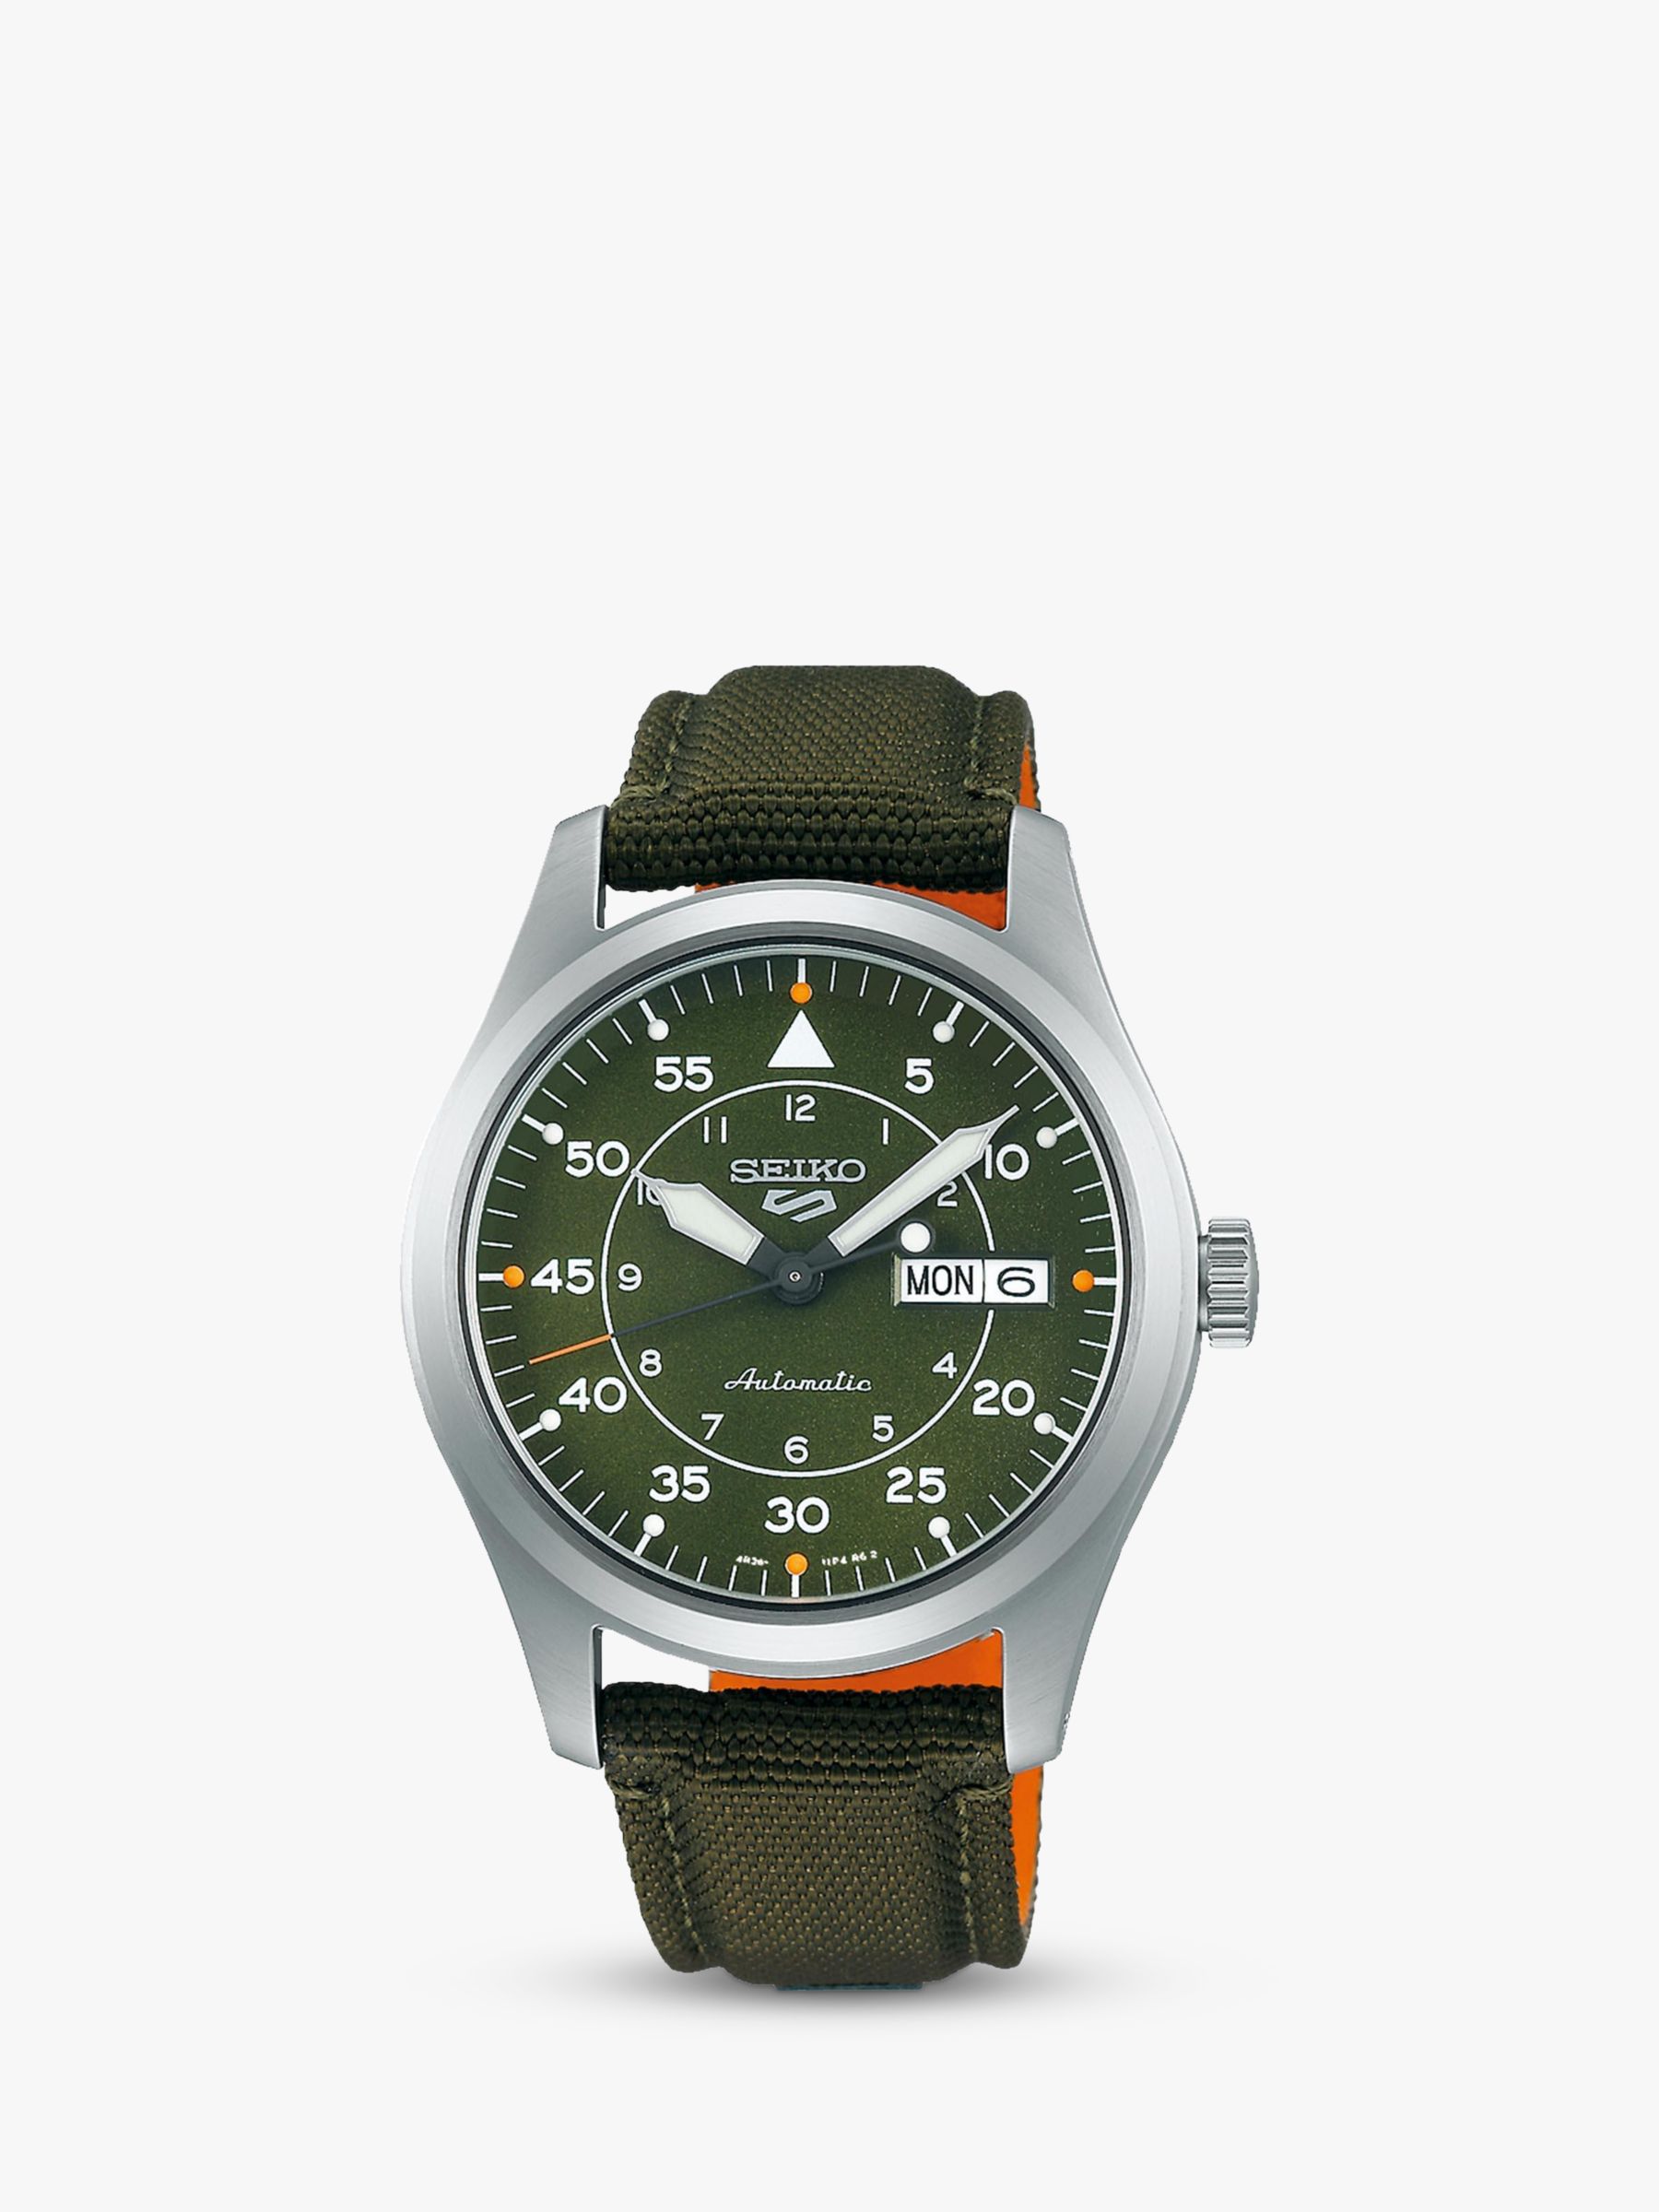 Buy Seiko Men's 5 Sports Flieger Day Date Automatic Fabric Strap Watch, Green SRPH29K1 Online at johnlewis.com